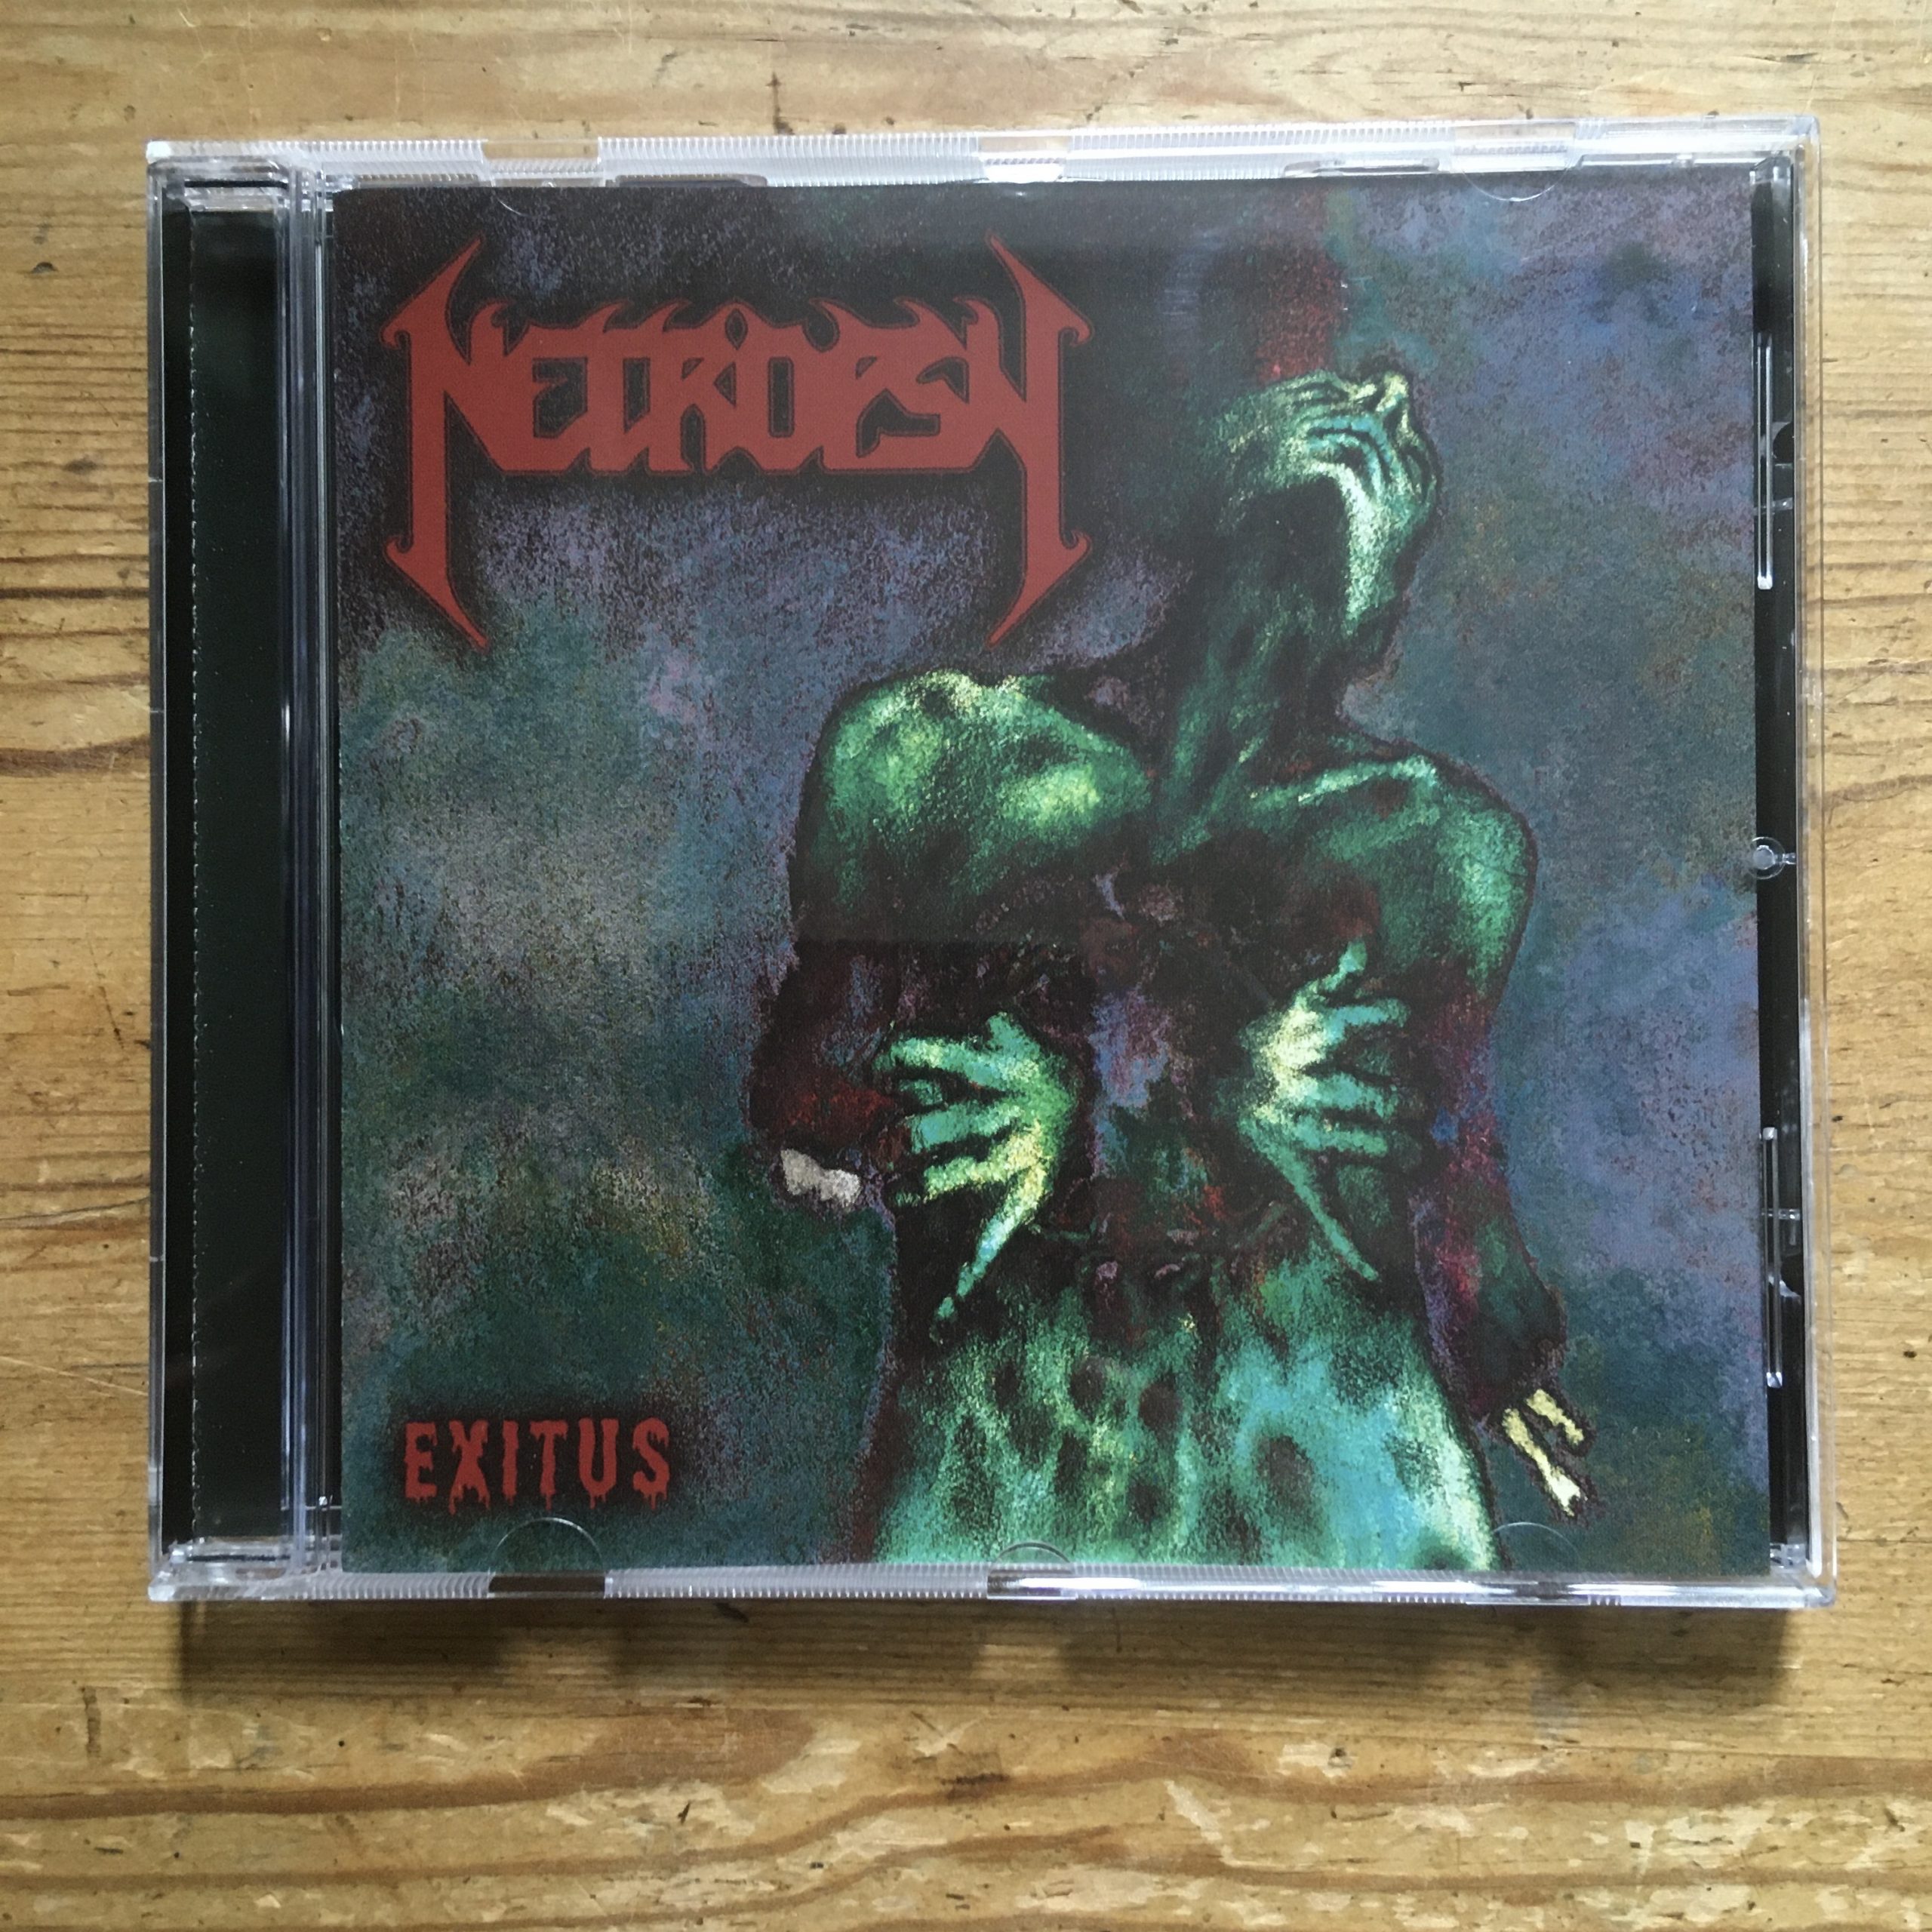 Photo of the Necropsy - "Exitus" MCD